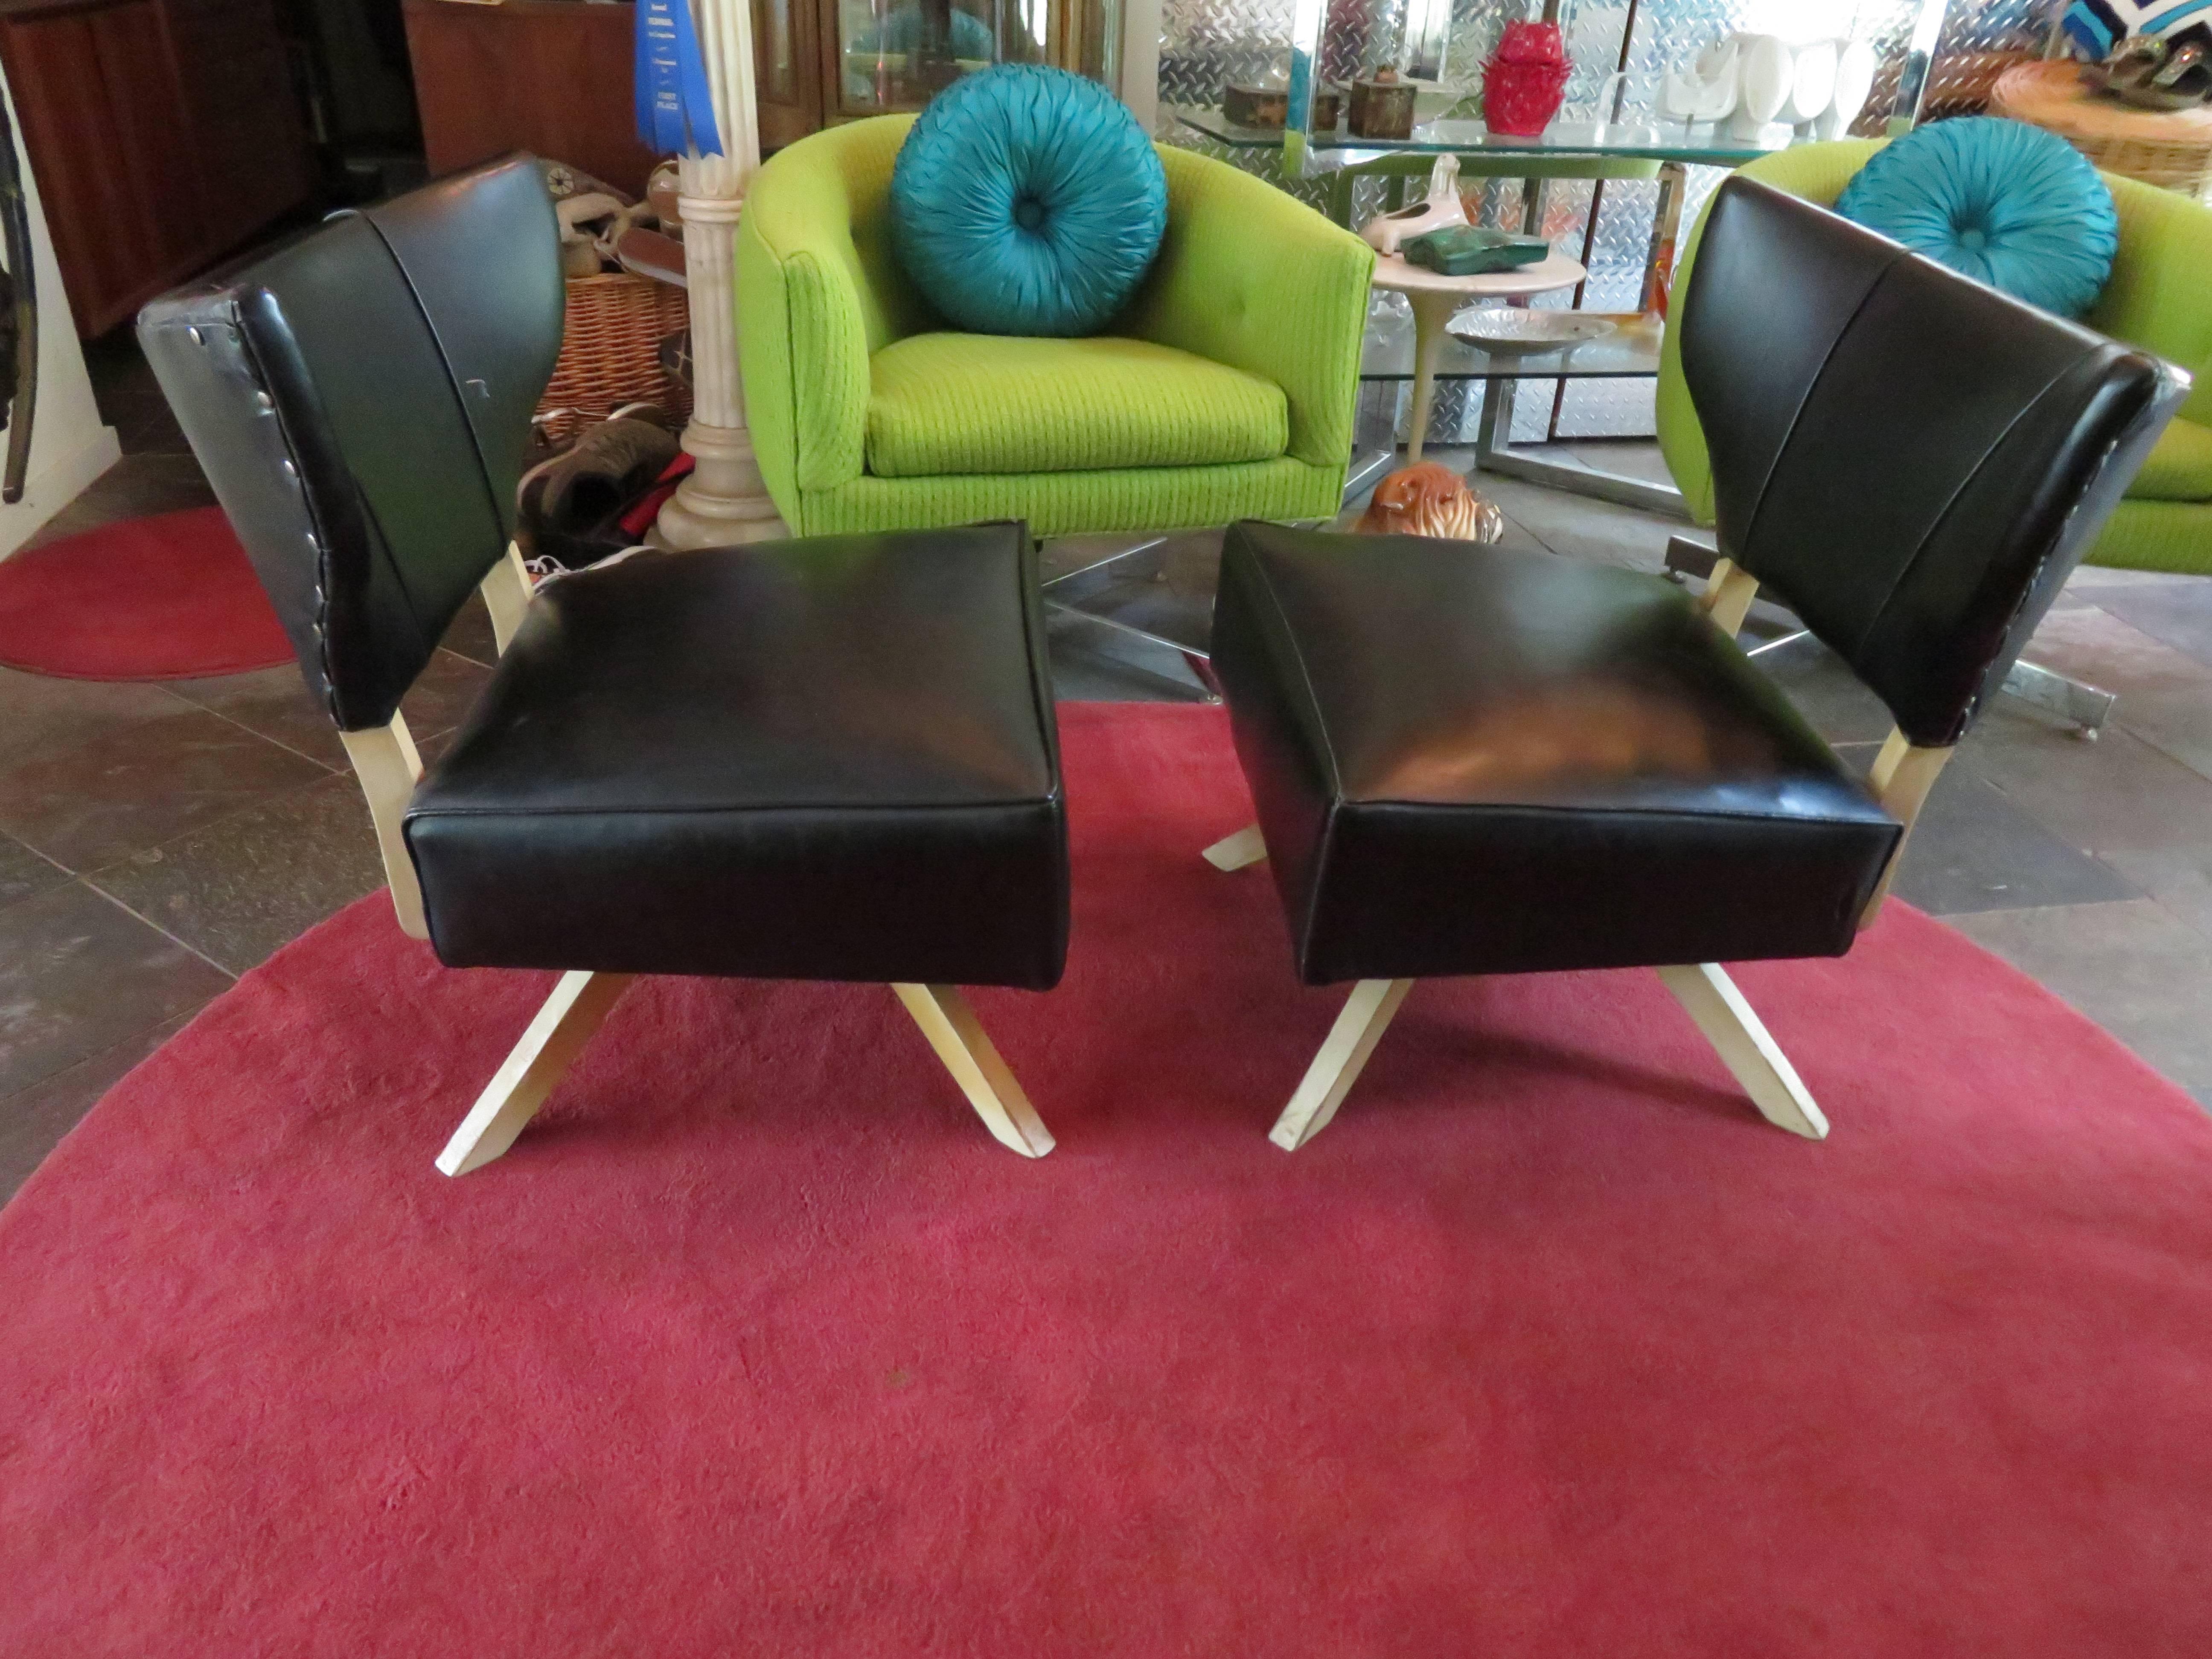 Super cool pair of Kroehler bat wing swivel slipper chairs. The chairs are in nice vintage condition and retain their original black faux leather-reupholstery is recommended. We love the outrageous bat wing style backs with the extra wide seats and